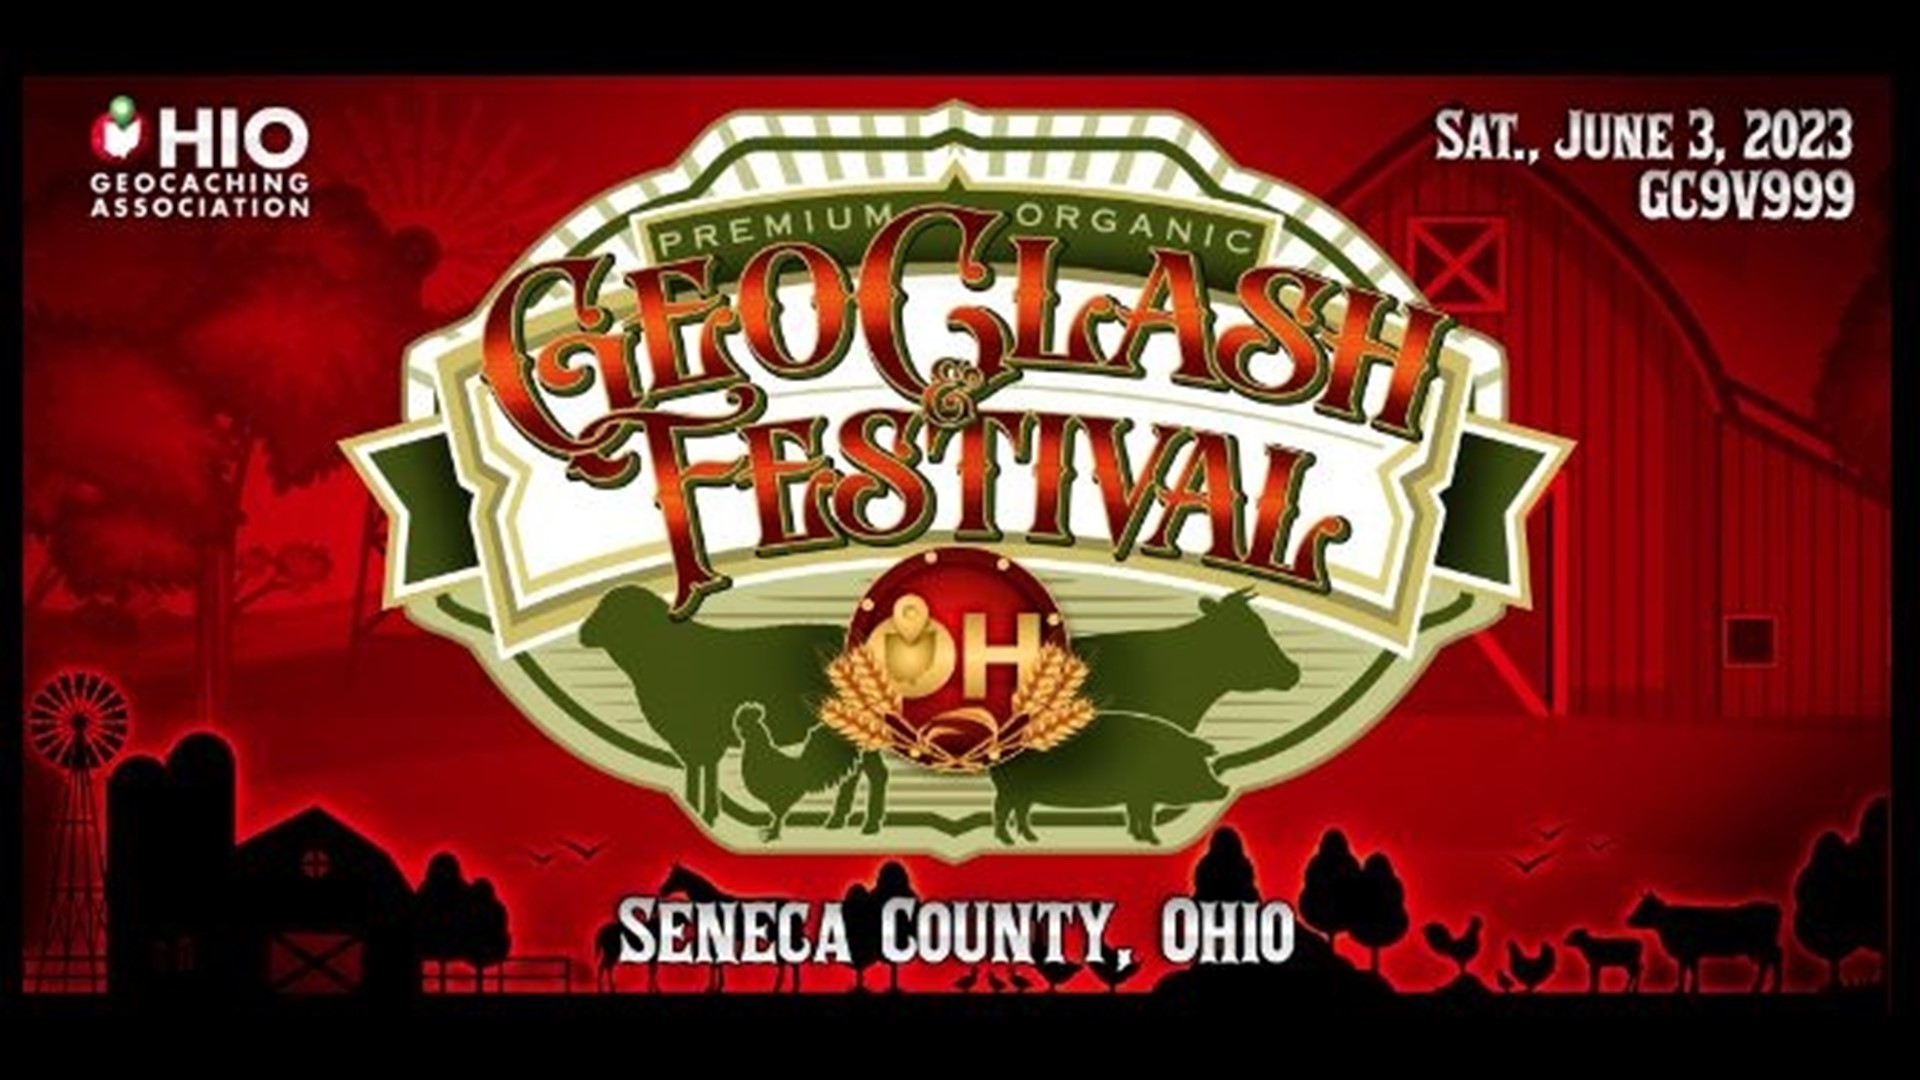 The Ohio GeoClash & Festival 2023 is the third year for the event hosted by the Ohio Geocaching Association.